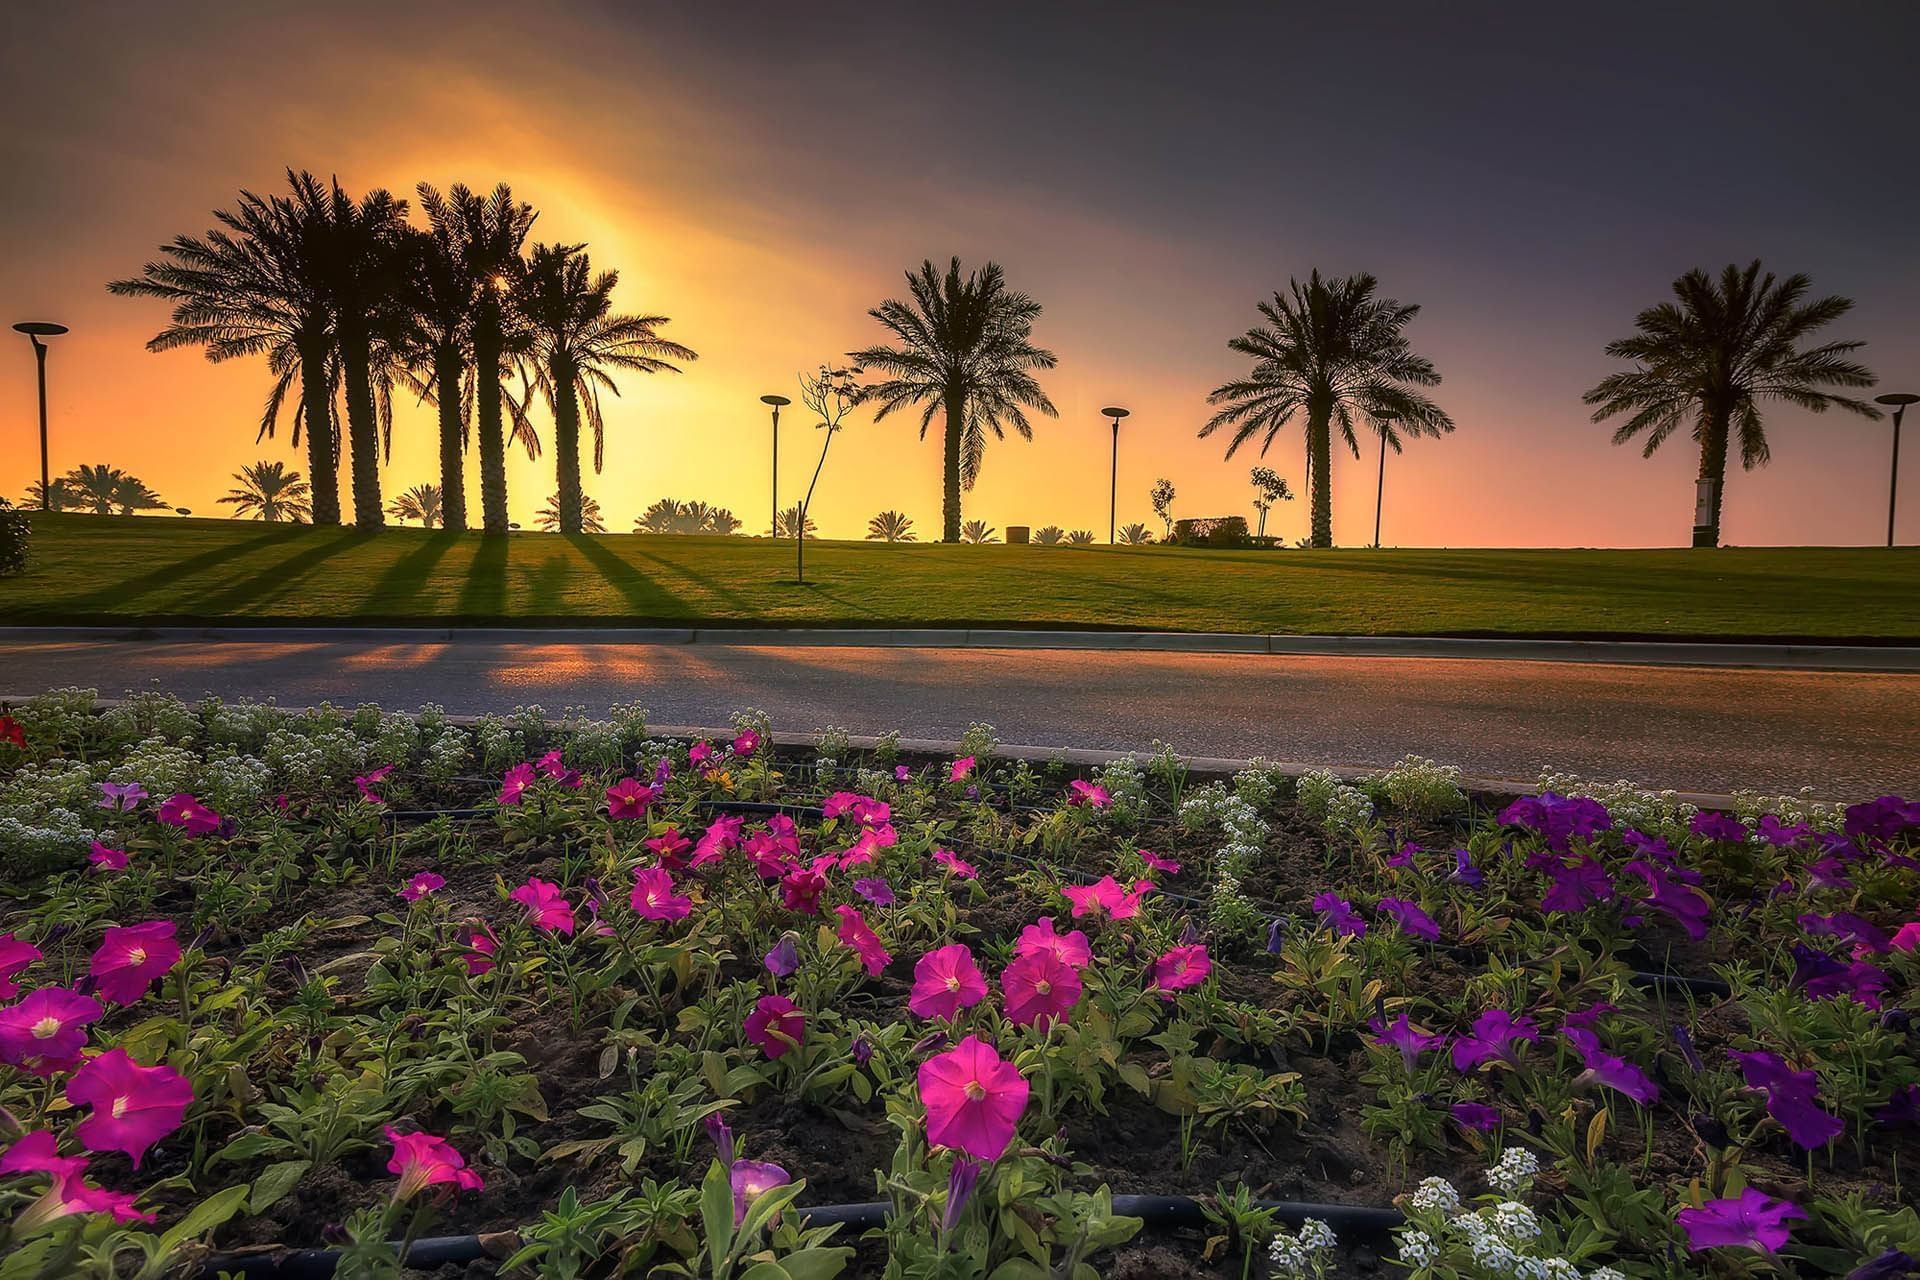 Sunrise view Modon Lake Dammam - flowers in the foreground